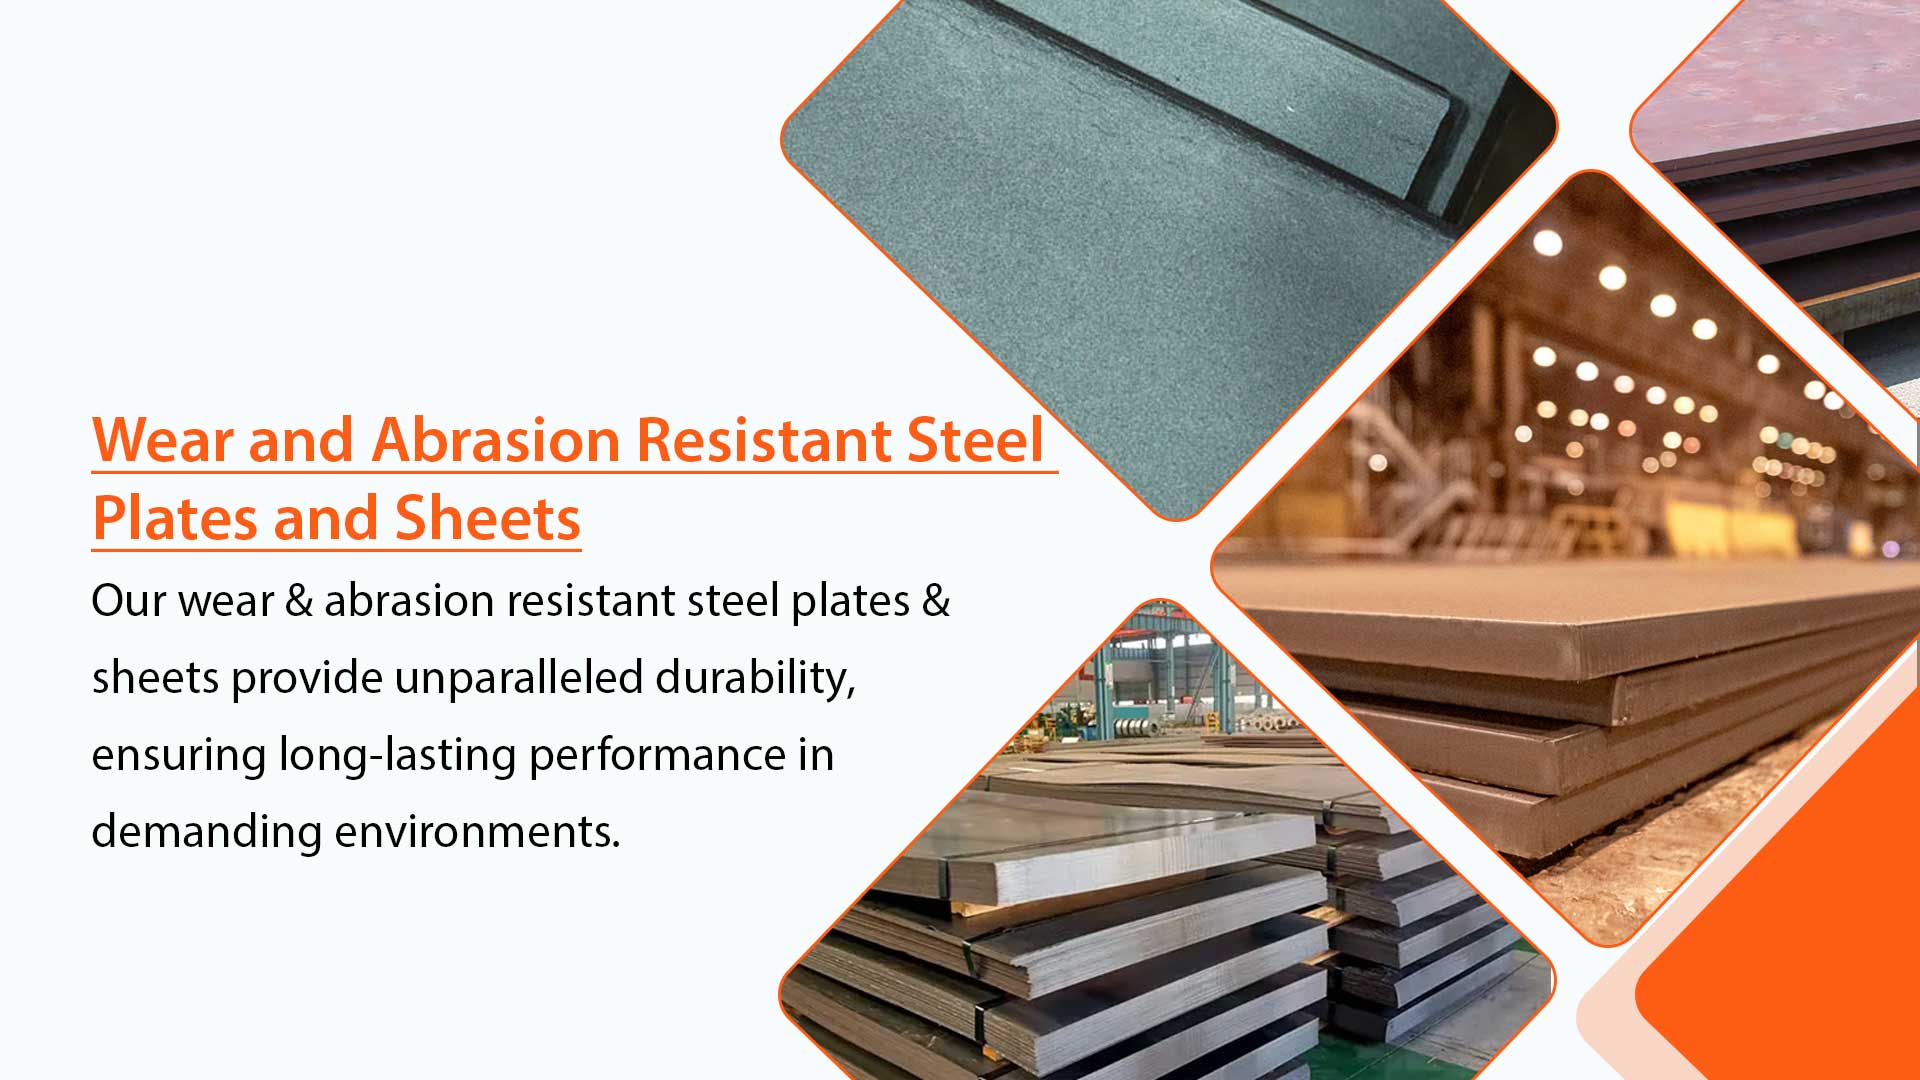 Wear and Abrasion Resistant Steel Plates and Sheets in Singapore